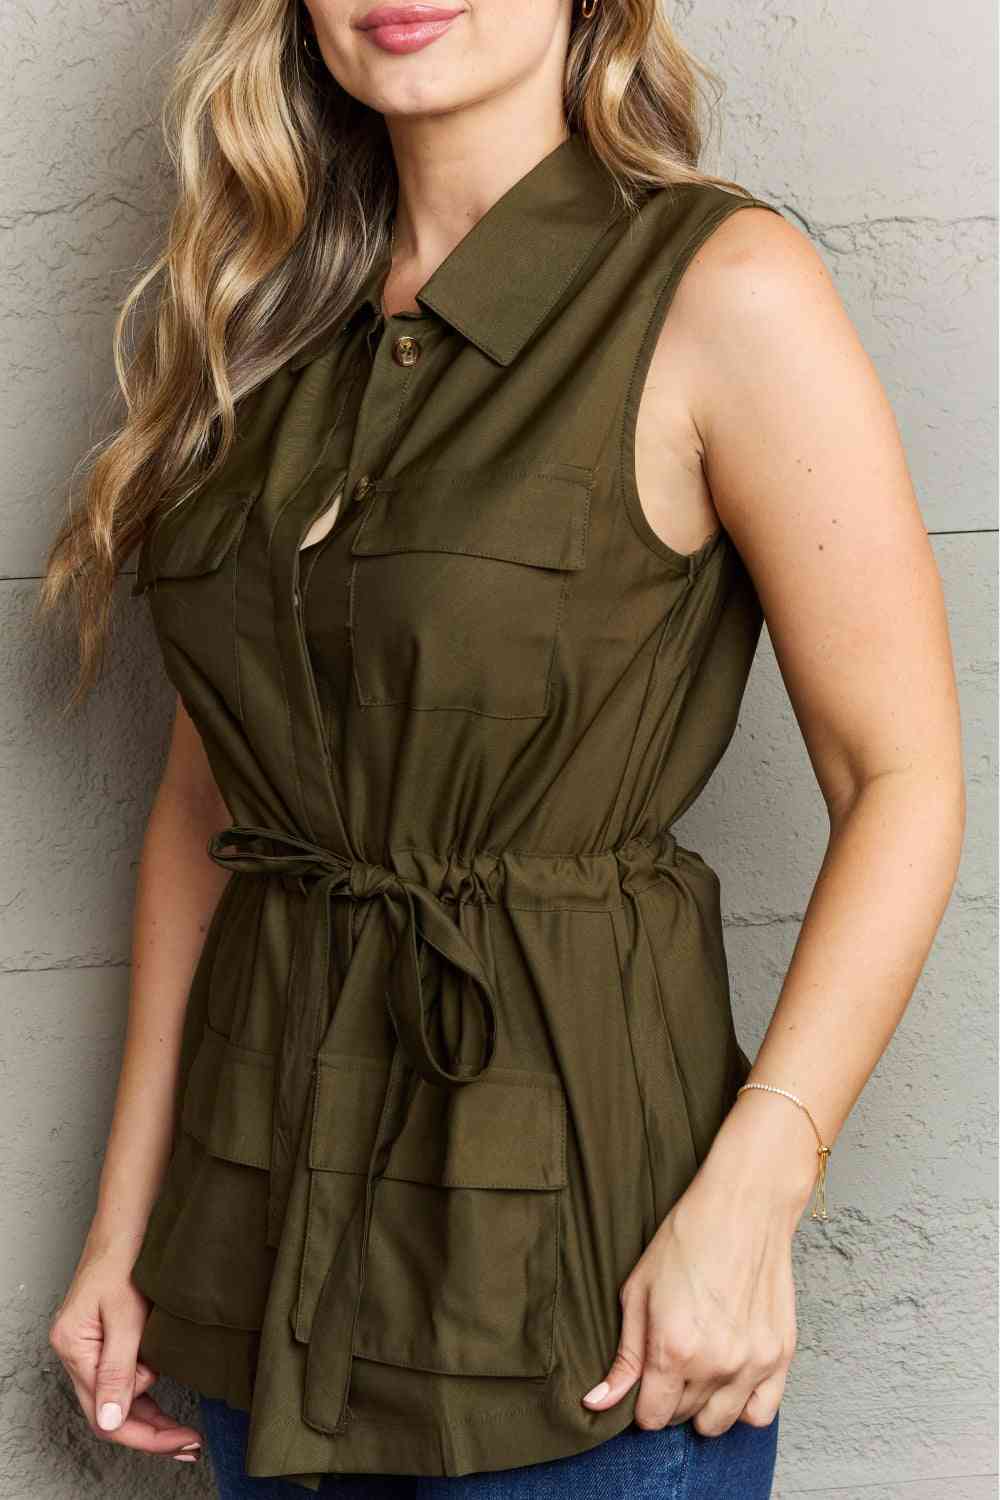 Light Sleeveless Collared Button Down Top - ARMY GREEN